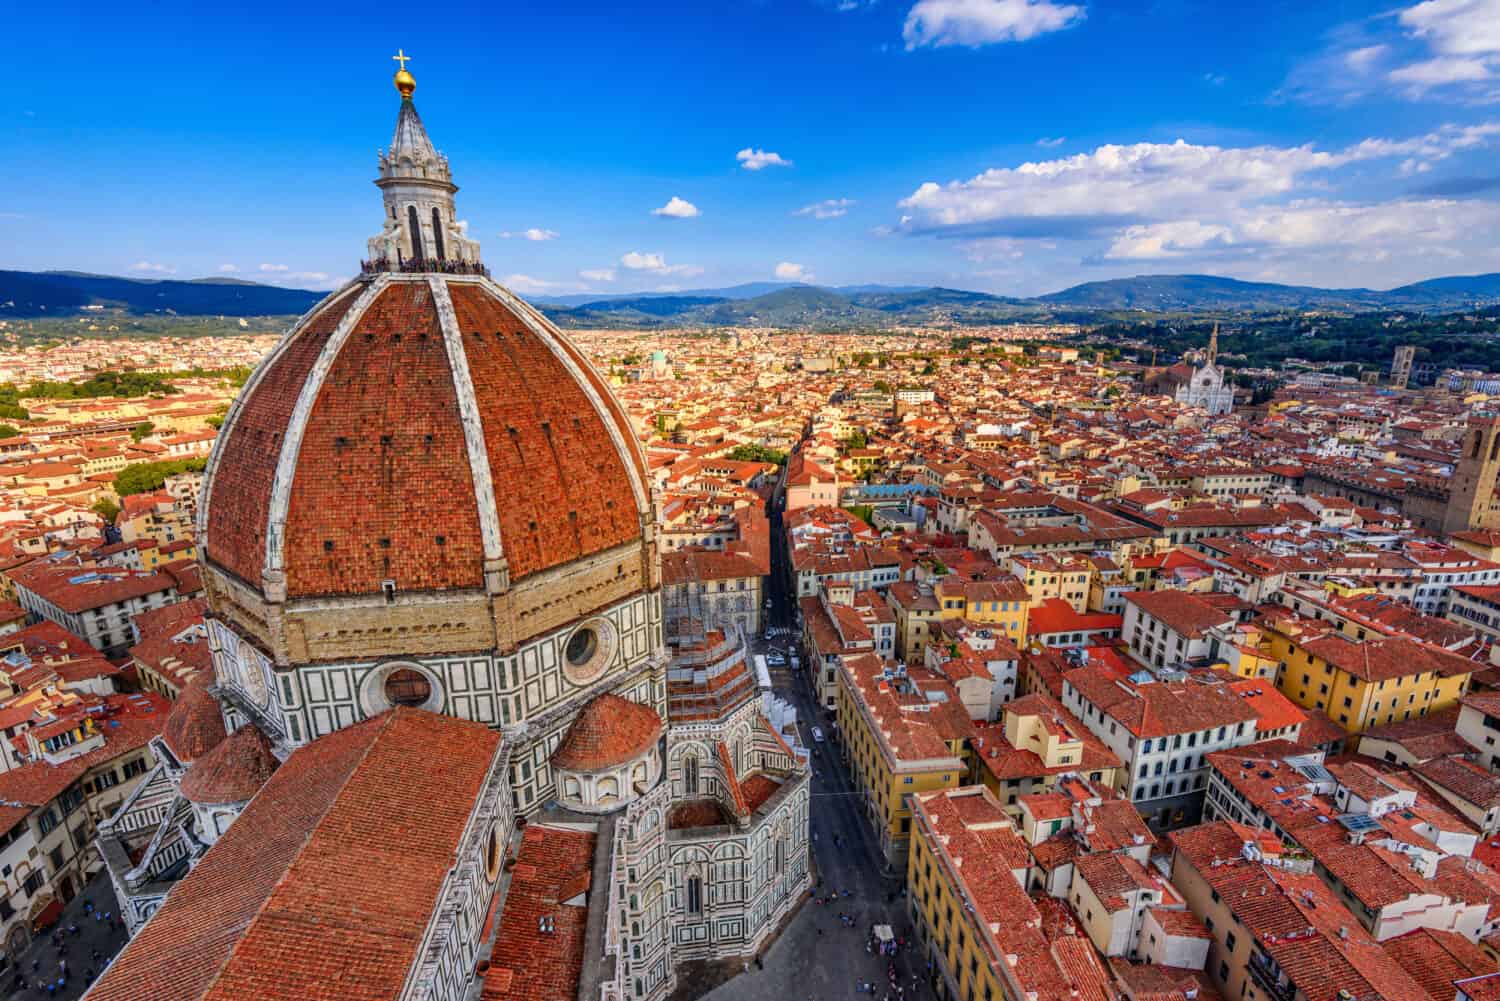 <p>Population: 360,930</p>    <p>Like many Italian cities, Florence is also steeped in rich history and culture. You can see the Ponte Vecchio (and even cross the bridge), as well as check out the Cathedral of Santa Maria del Fiore. But one of the most iconic landmarks in Florence is Michelangelo’s David located in the Accademia Gallery. After a learned day of tourism, end it with a delicious pasta dish.</p><p>Remember to scroll up and hit the ‘Follow’ button to keep up with the newest stories from Seattle Travel on your Microsoft Start feed or MSN homepage!</p>